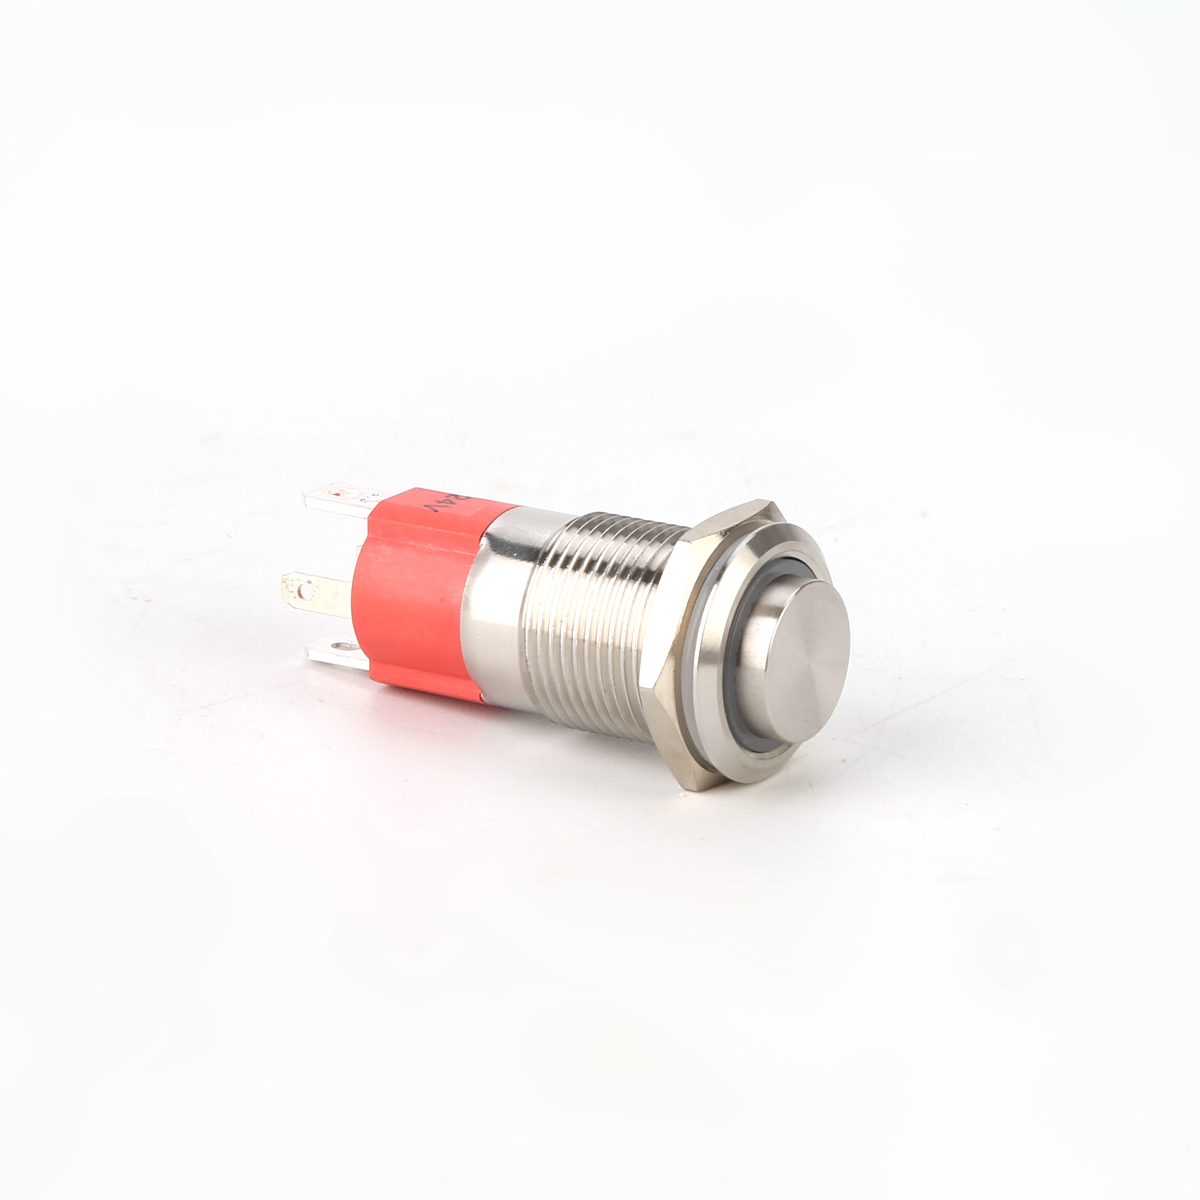 16MM-10A-250V-12V-4Pin-LED-Light-Button-Switch-Momentary-Reset-Metal-Push-Button-Switch-1493146-5